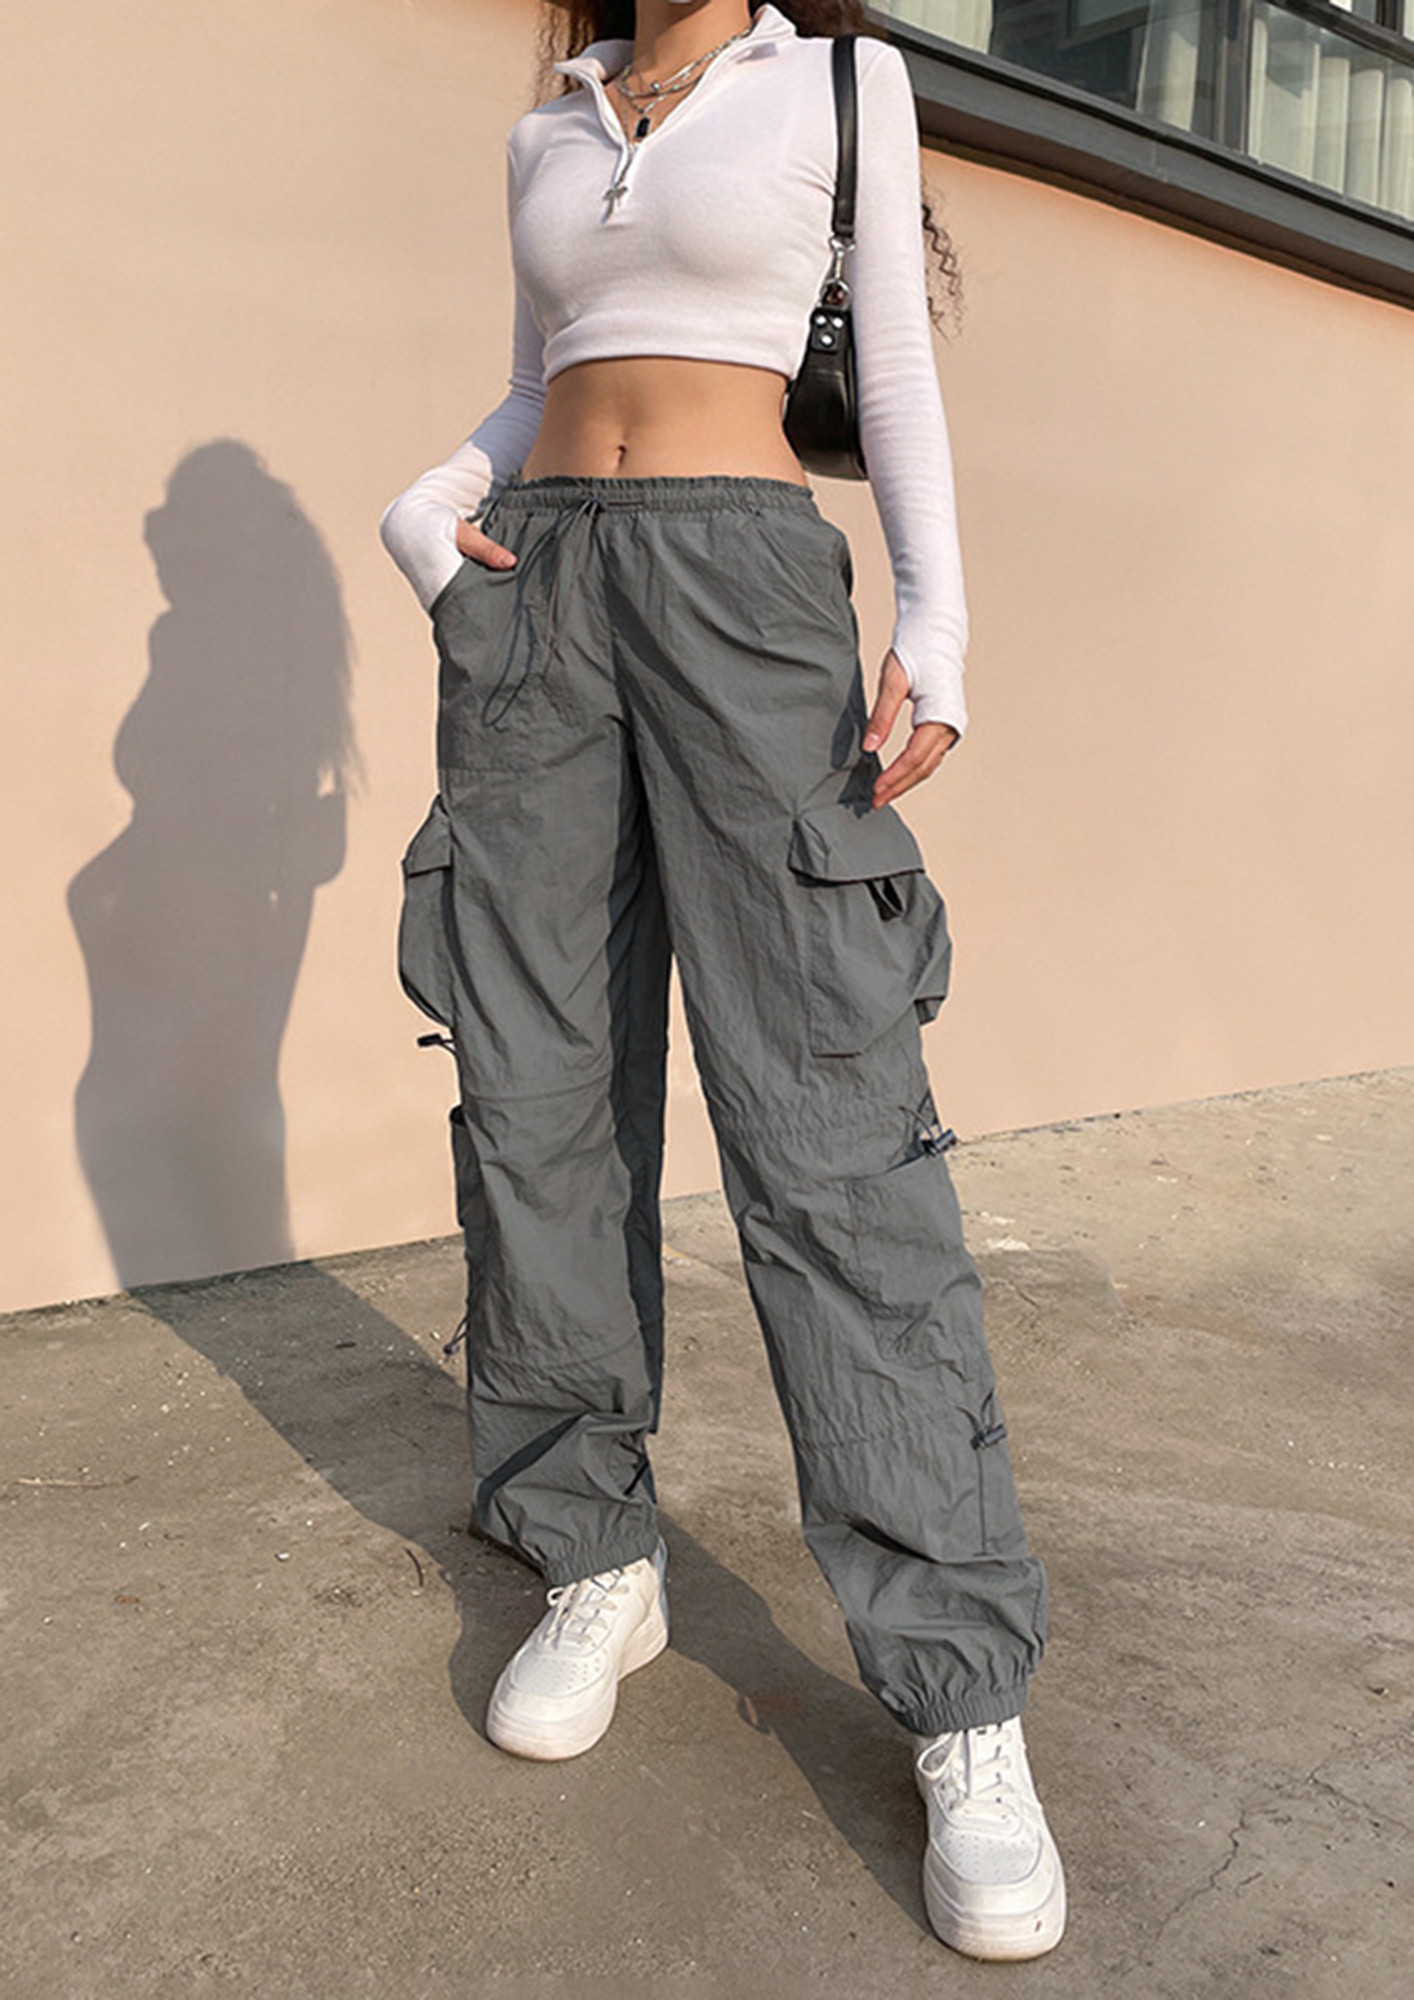 Reveal more than 158 cargo pants for women super hot